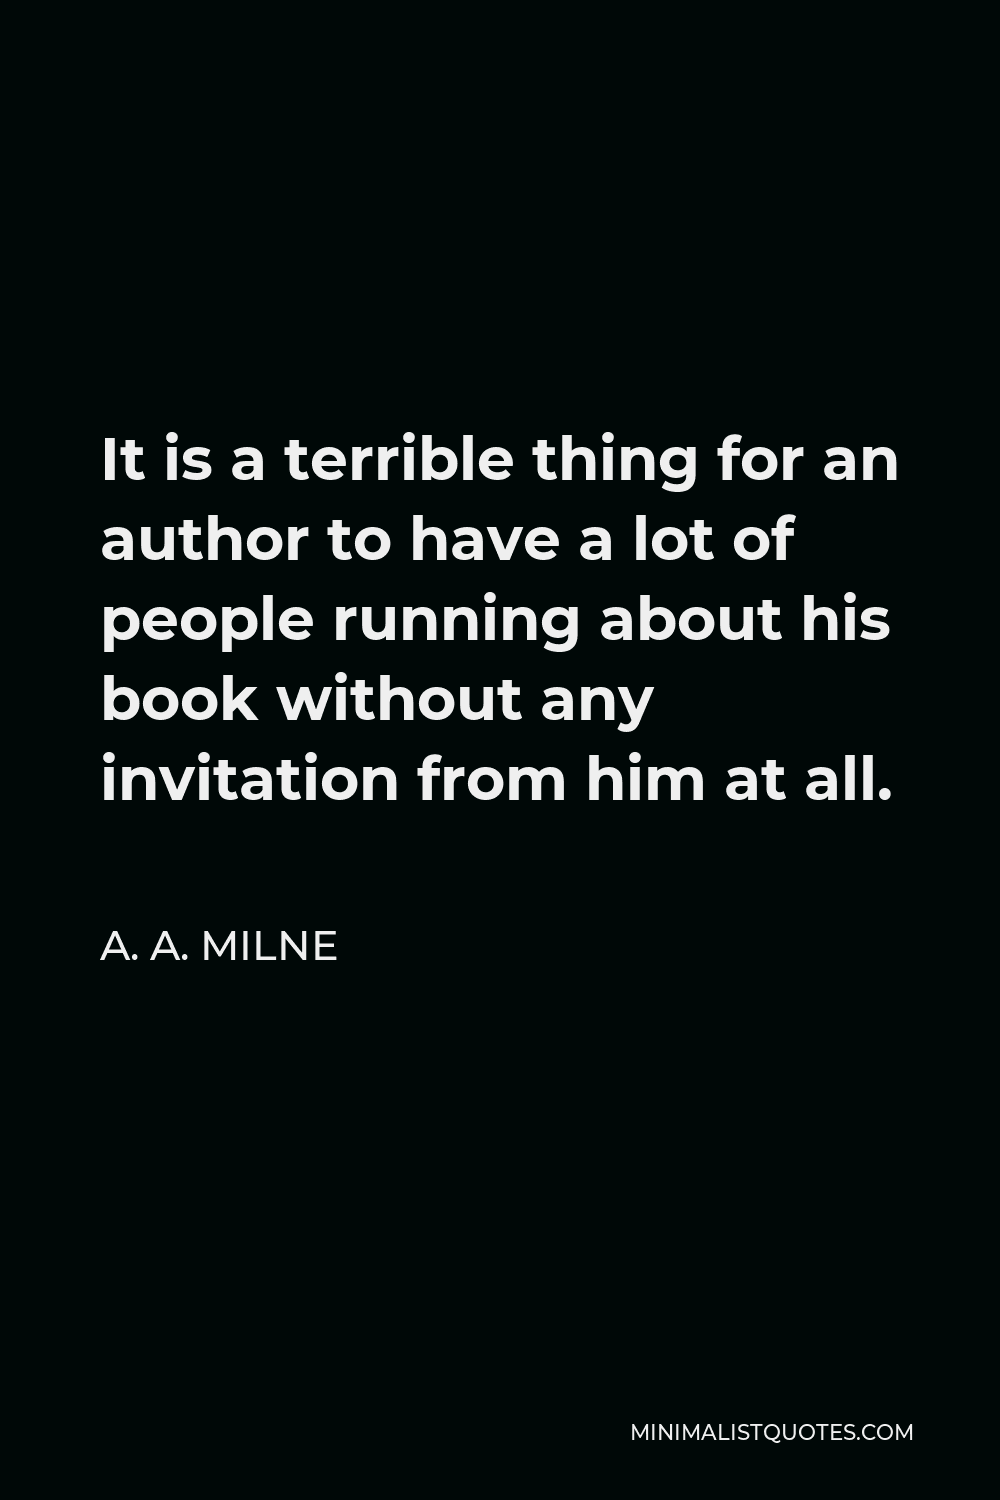 A. A. Milne Quote - It is a terrible thing for an author to have a lot of people running about his book without any invitation from him at all.